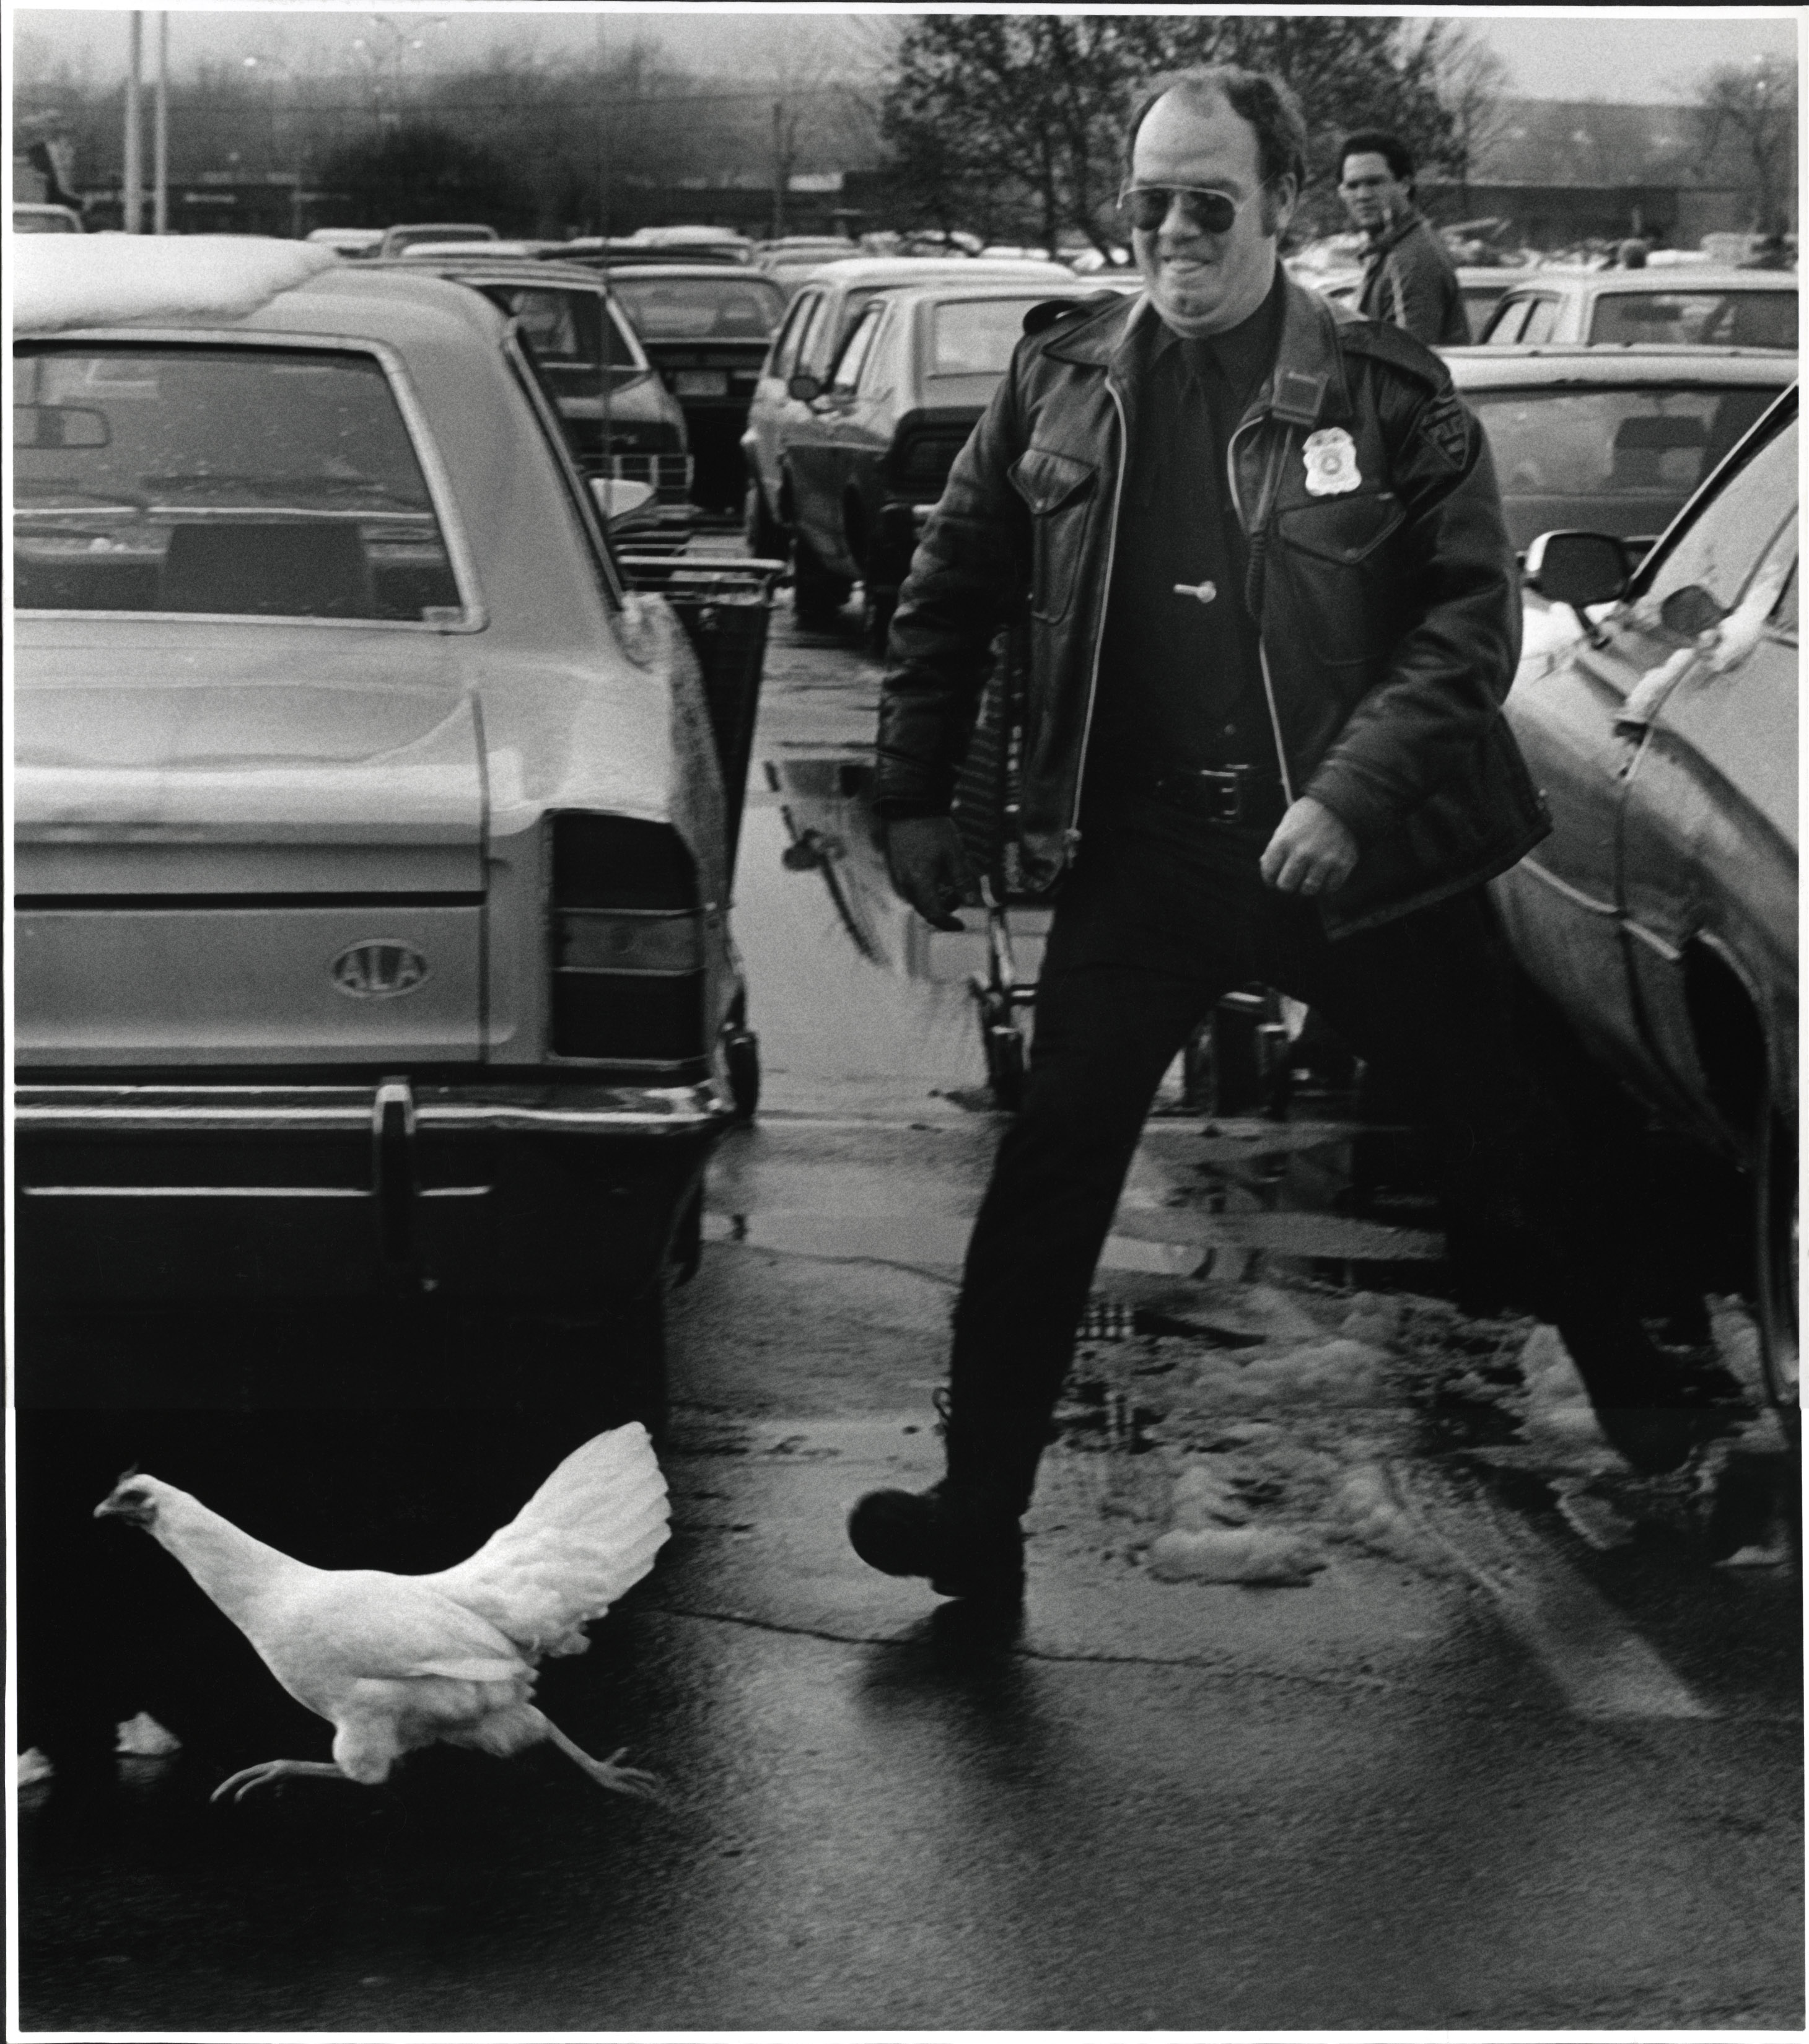 Depiction of West Springfield police officer chasing a chicken in the Century Plaza, 1984